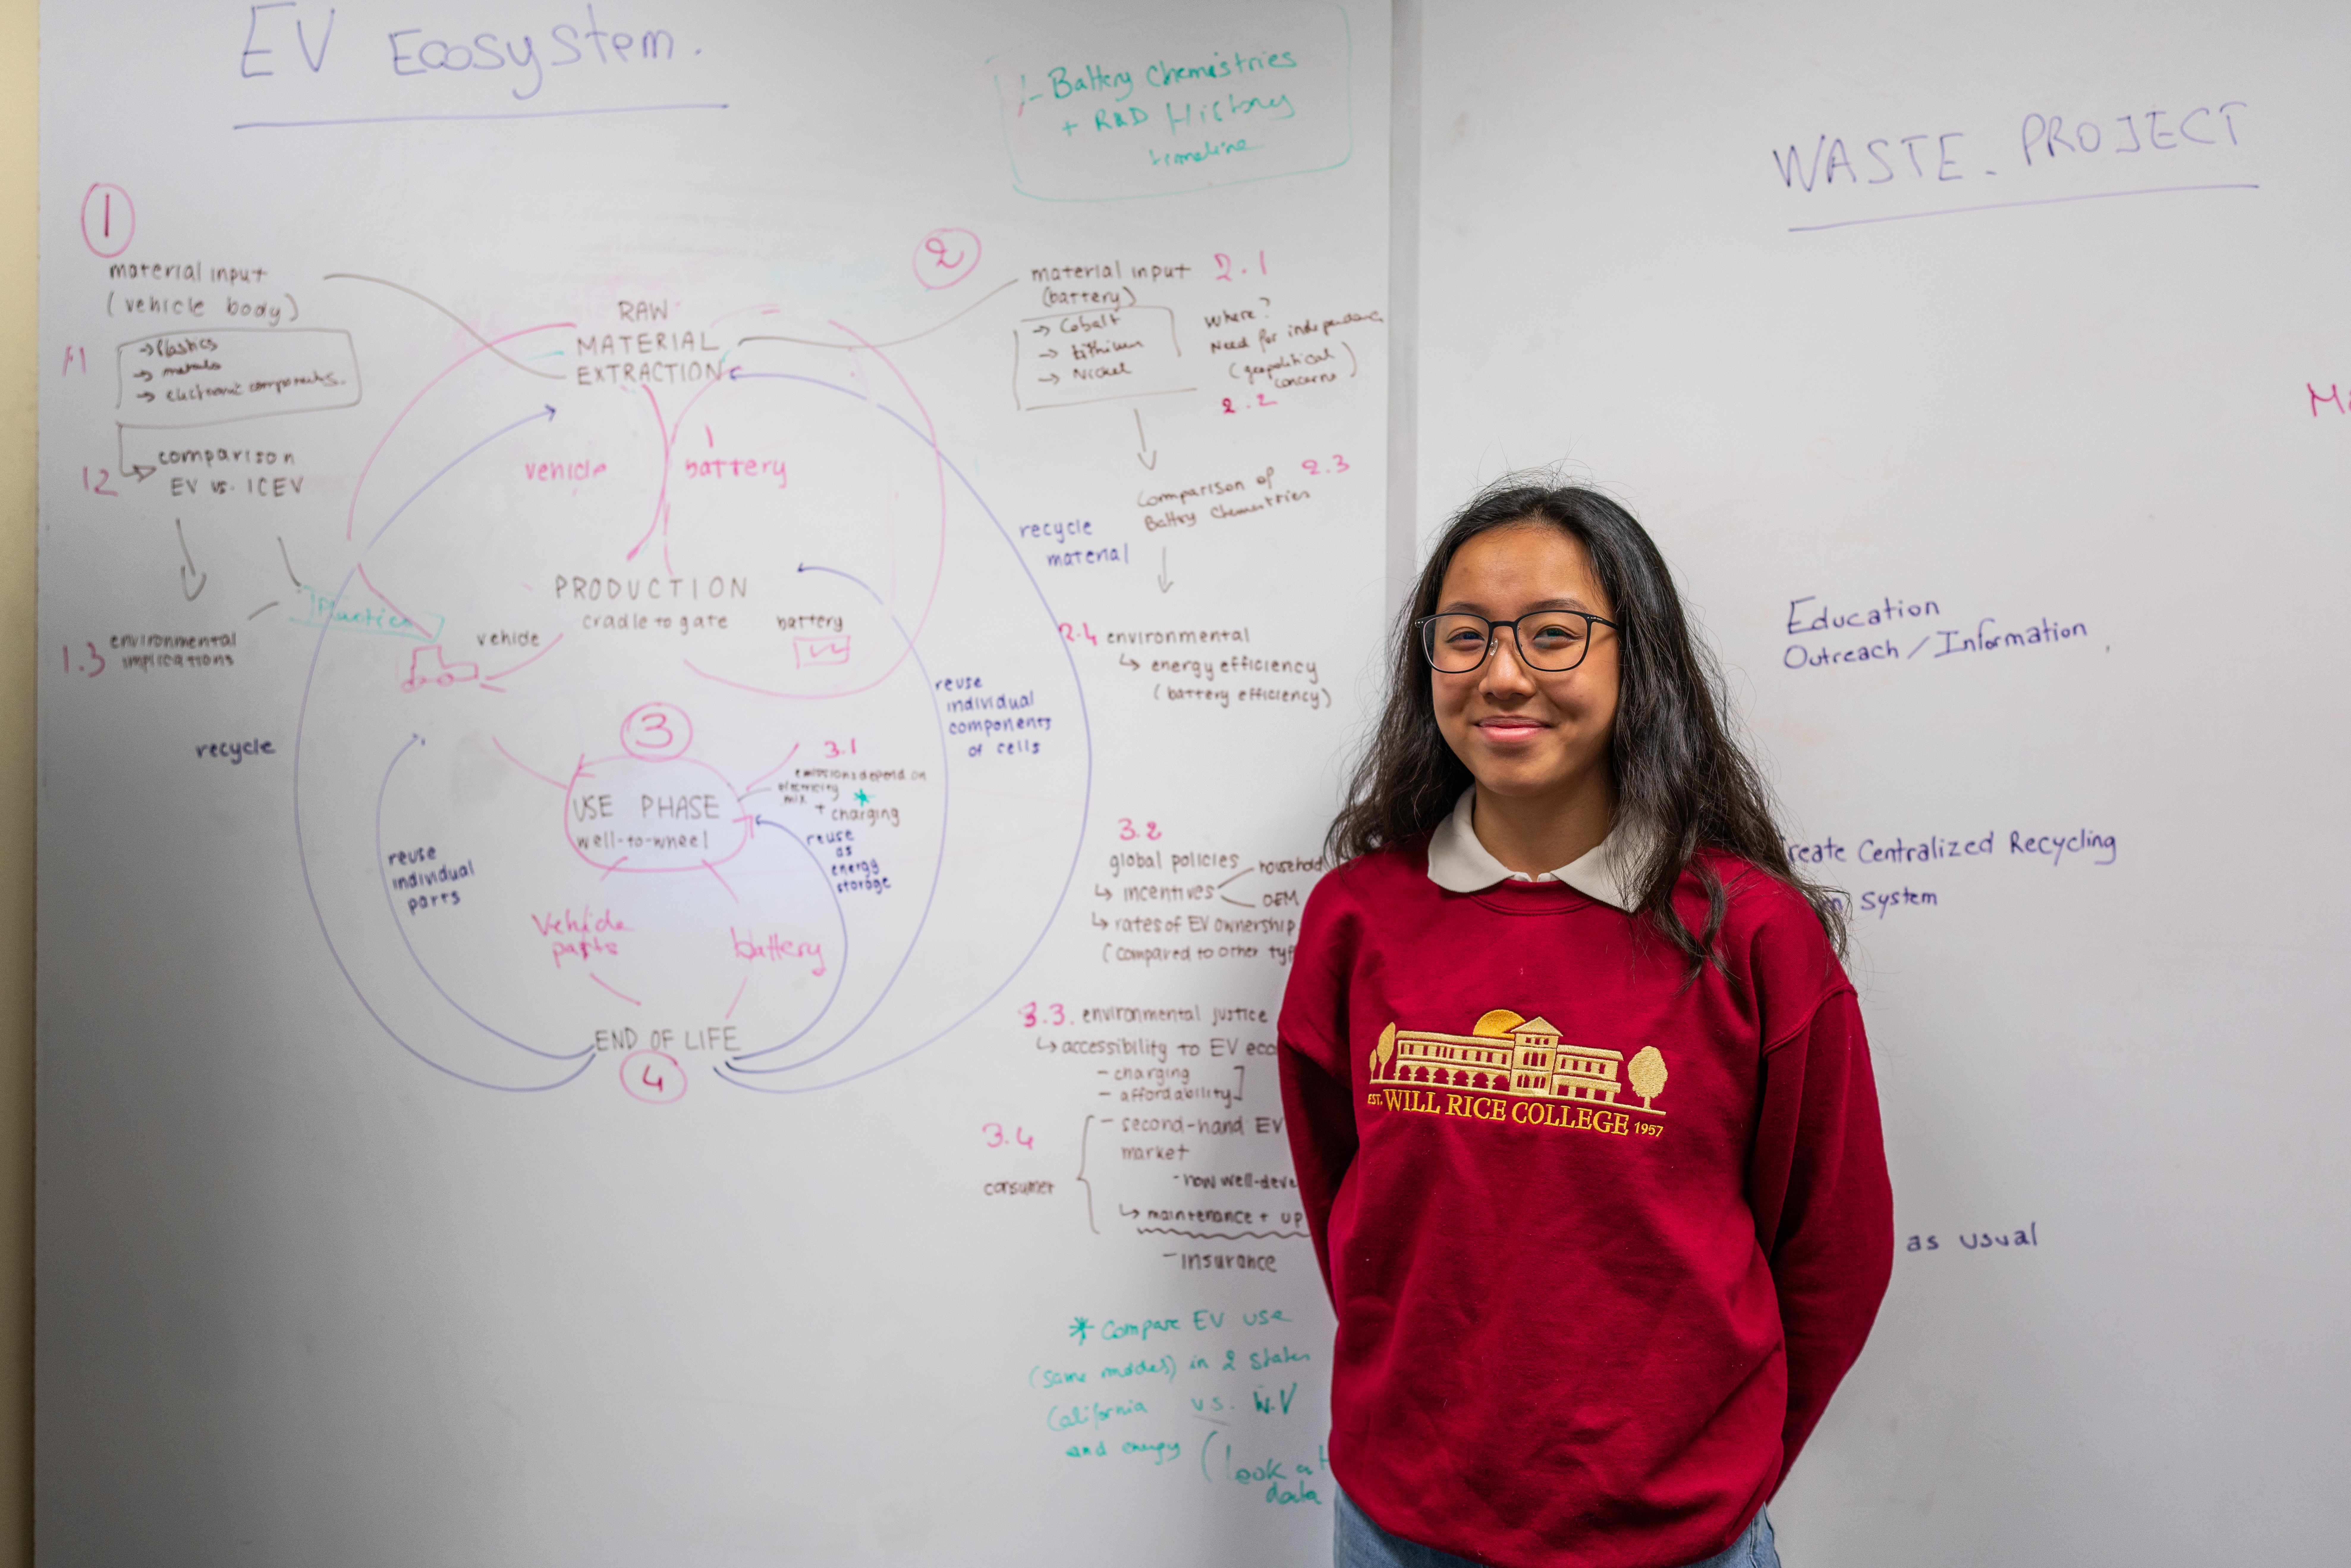 Female student wearing red crewneck standing in front of white board with colorful words and diagrams.